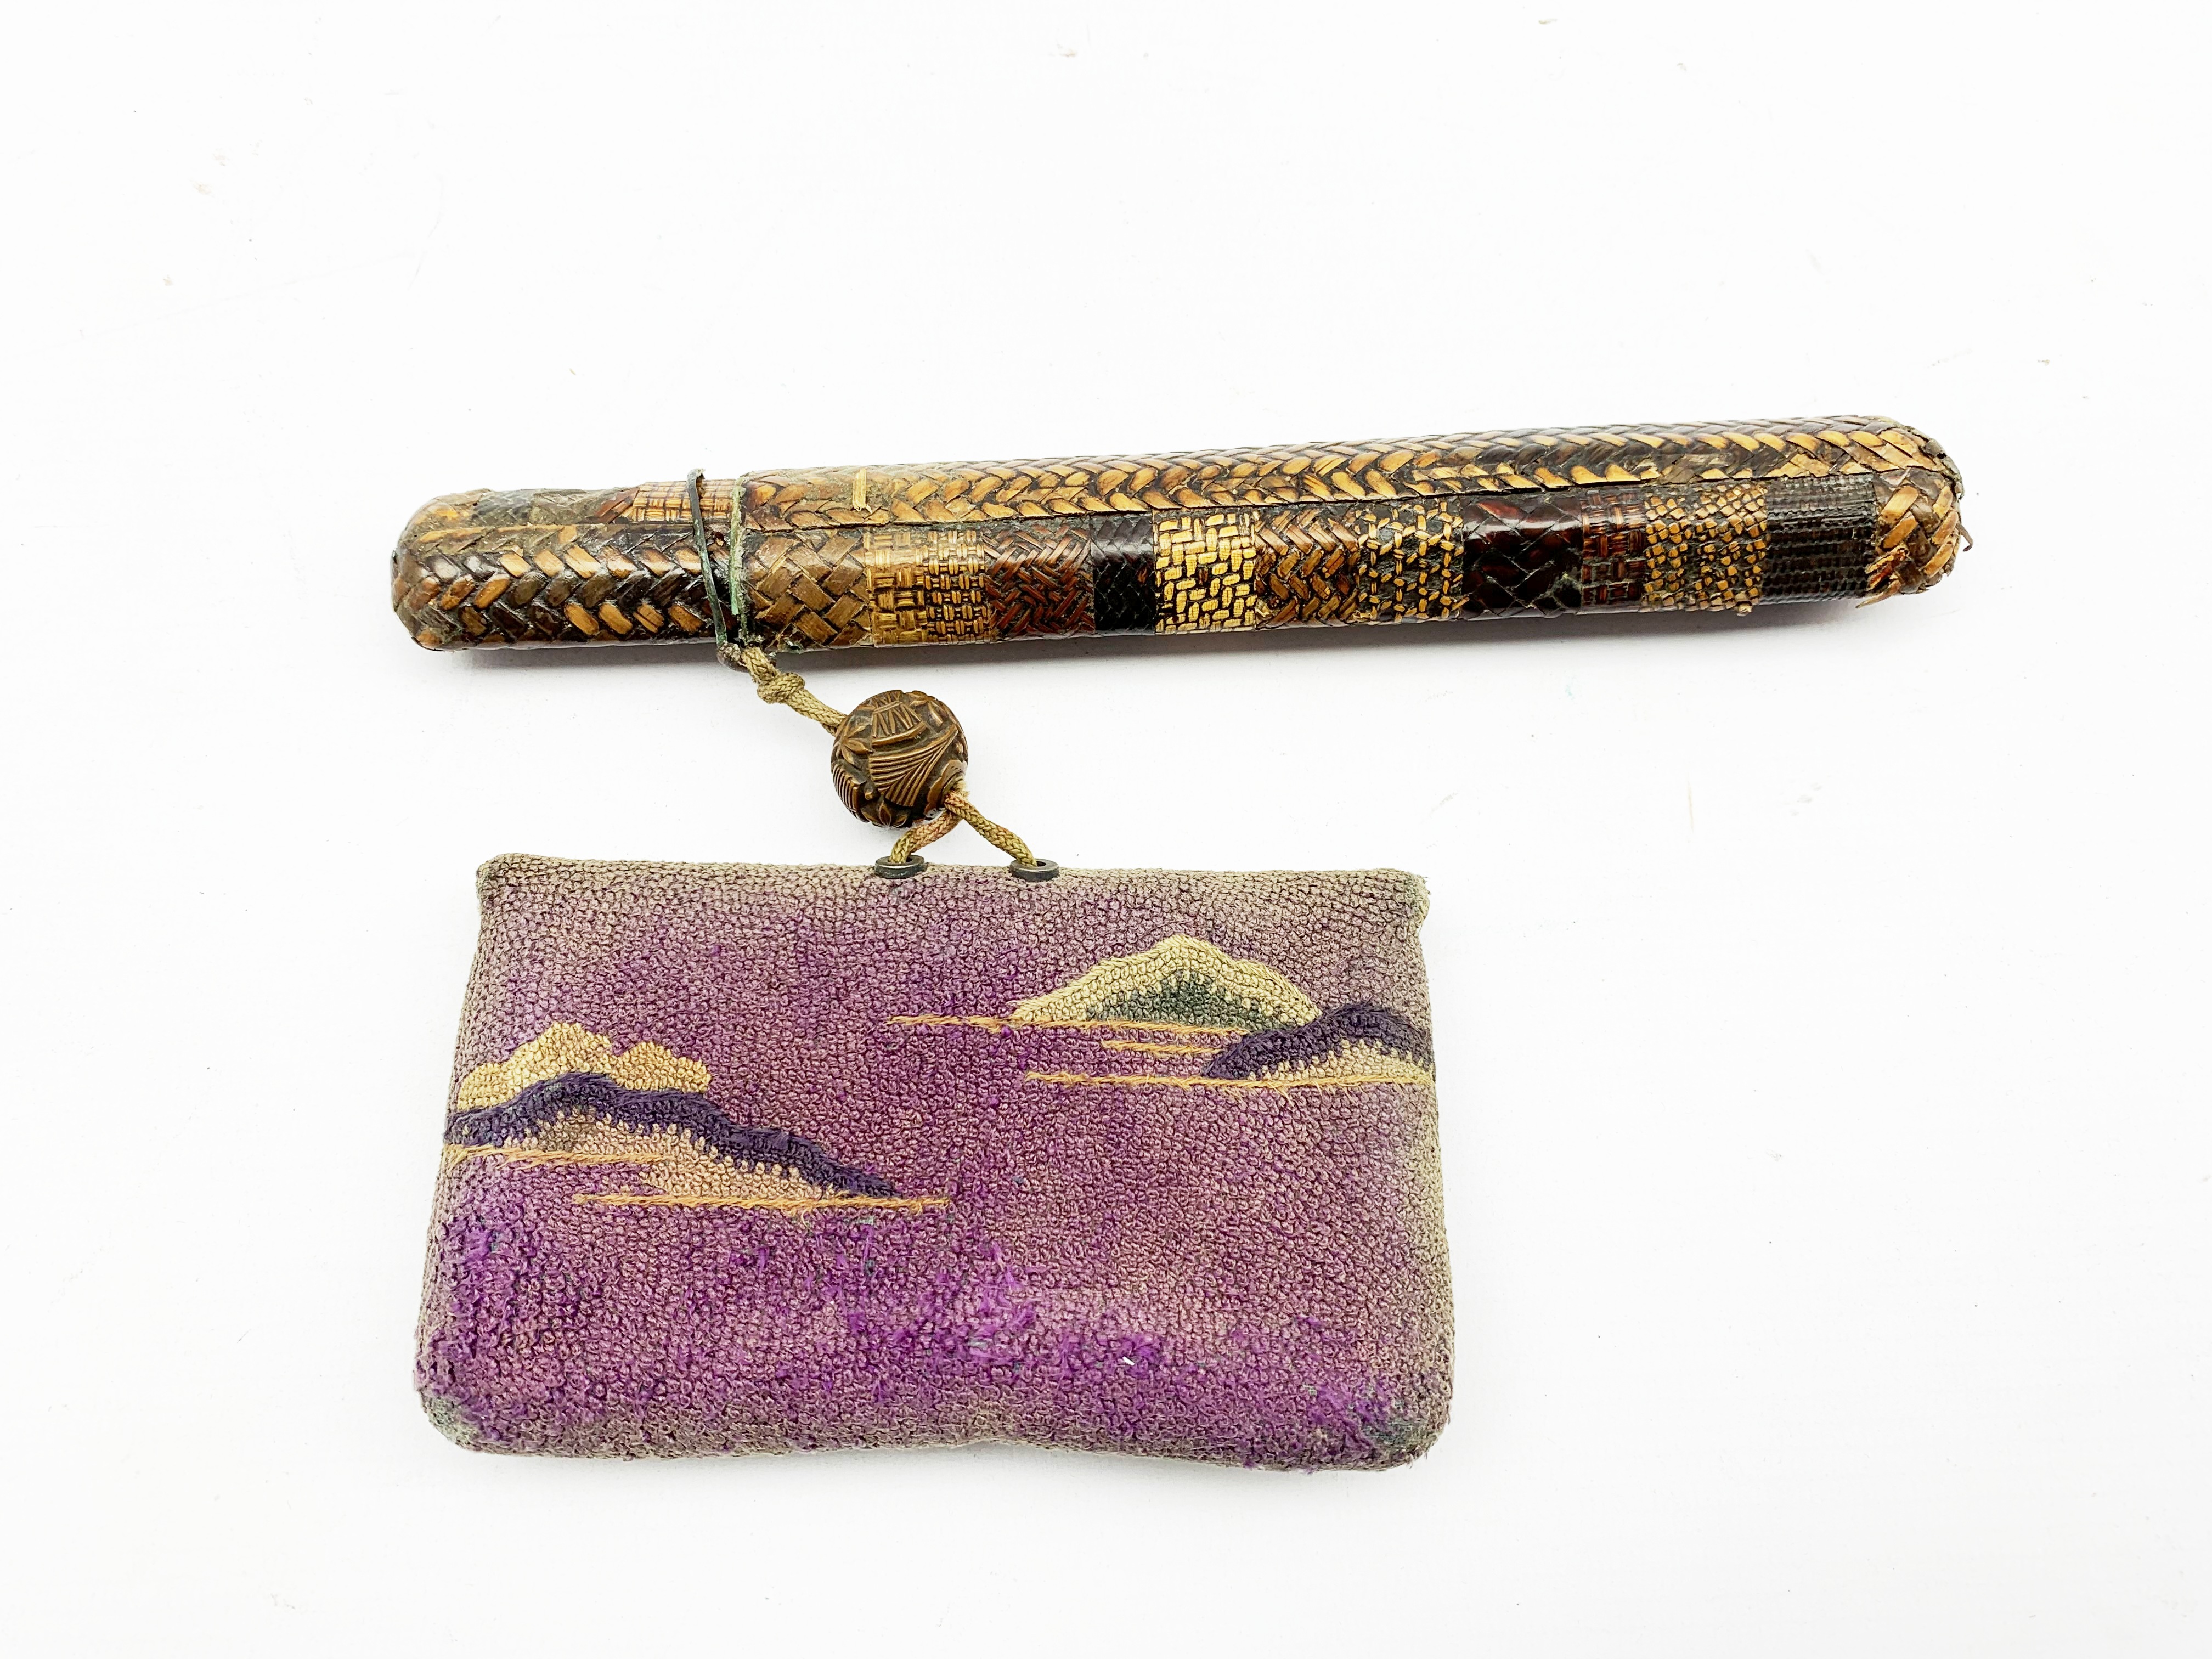 19th century Japanese embroidered tobacco pouch (tabako-ire) with bronze mae-kanagu in the form of f - Image 5 of 7